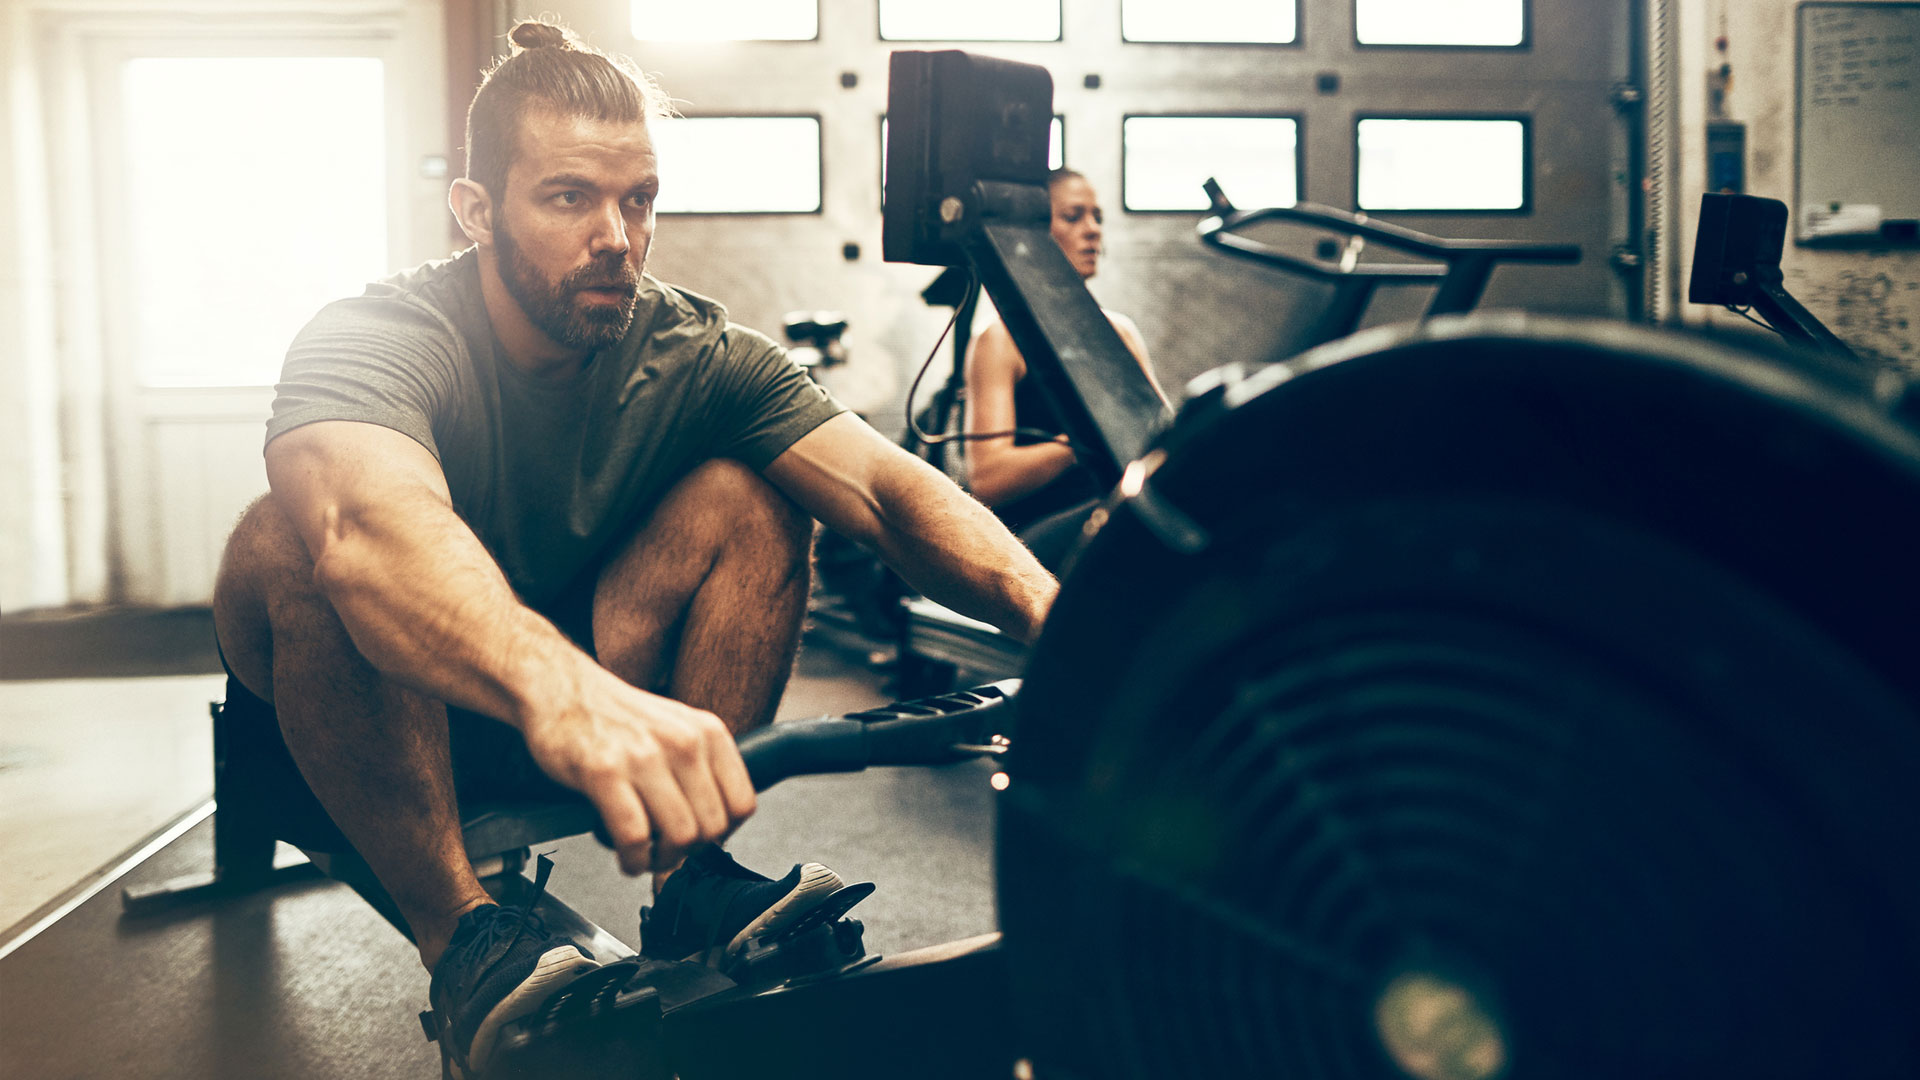 How to lose weight using a rowing machine: image shows man using a rowing machine